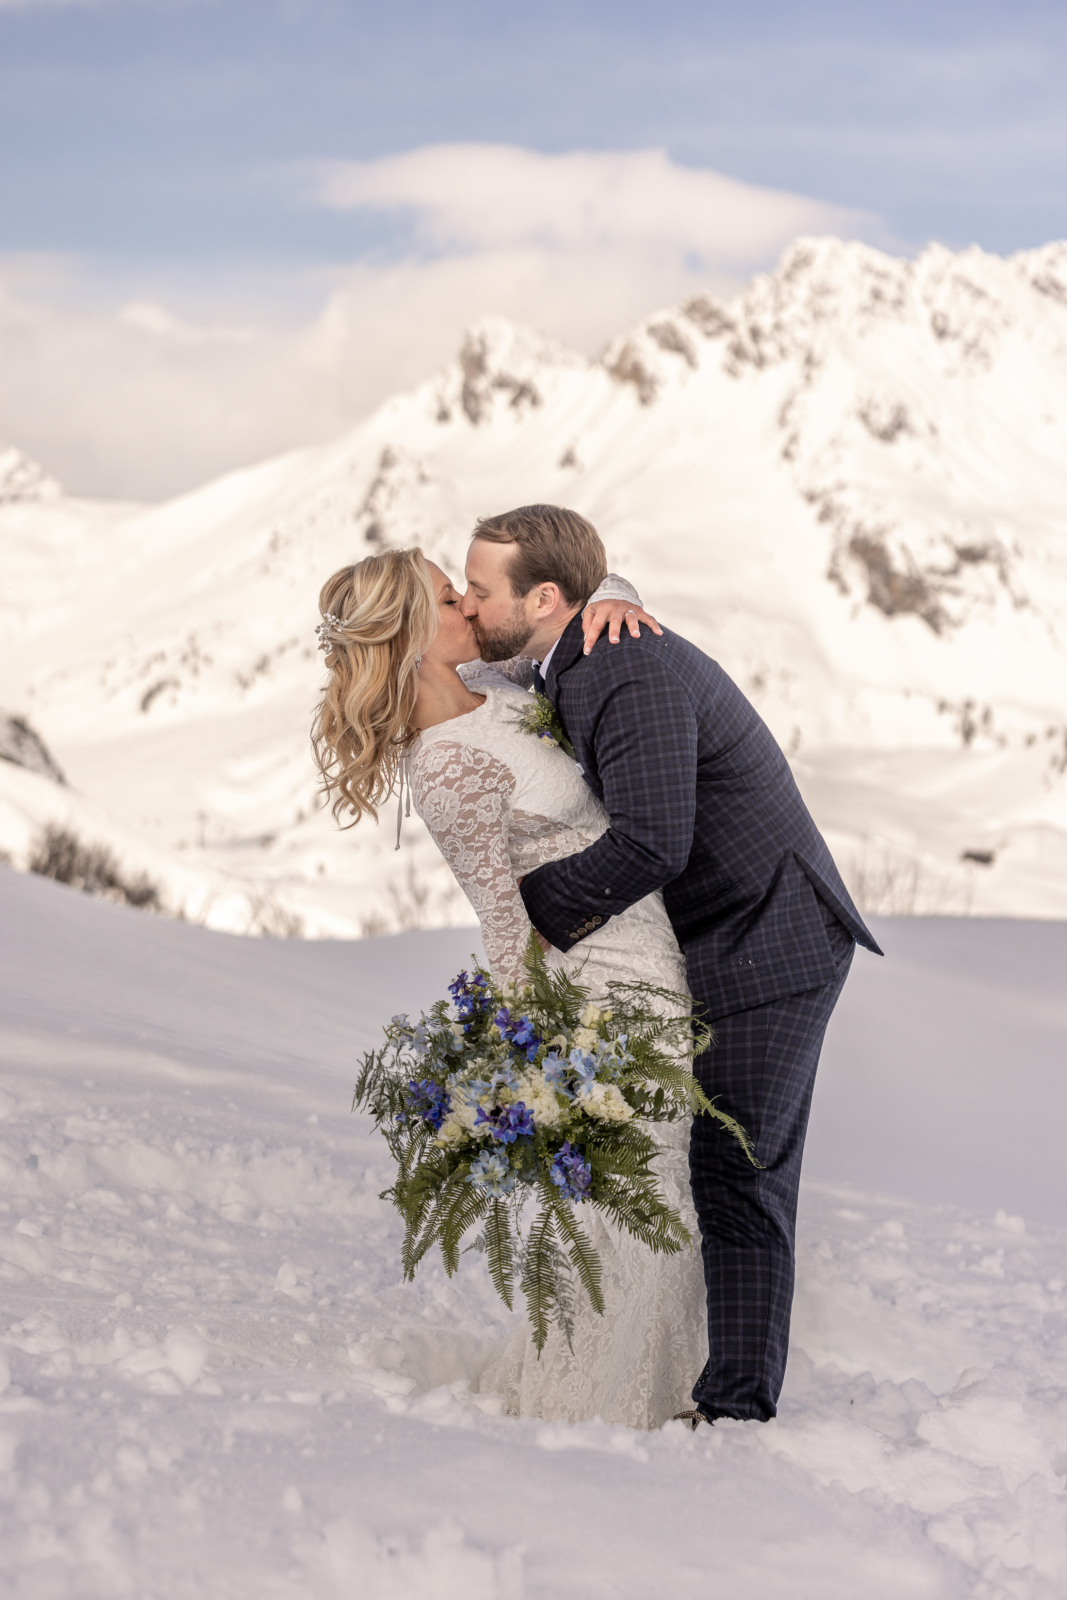 Elopement photos in the snowy mountains